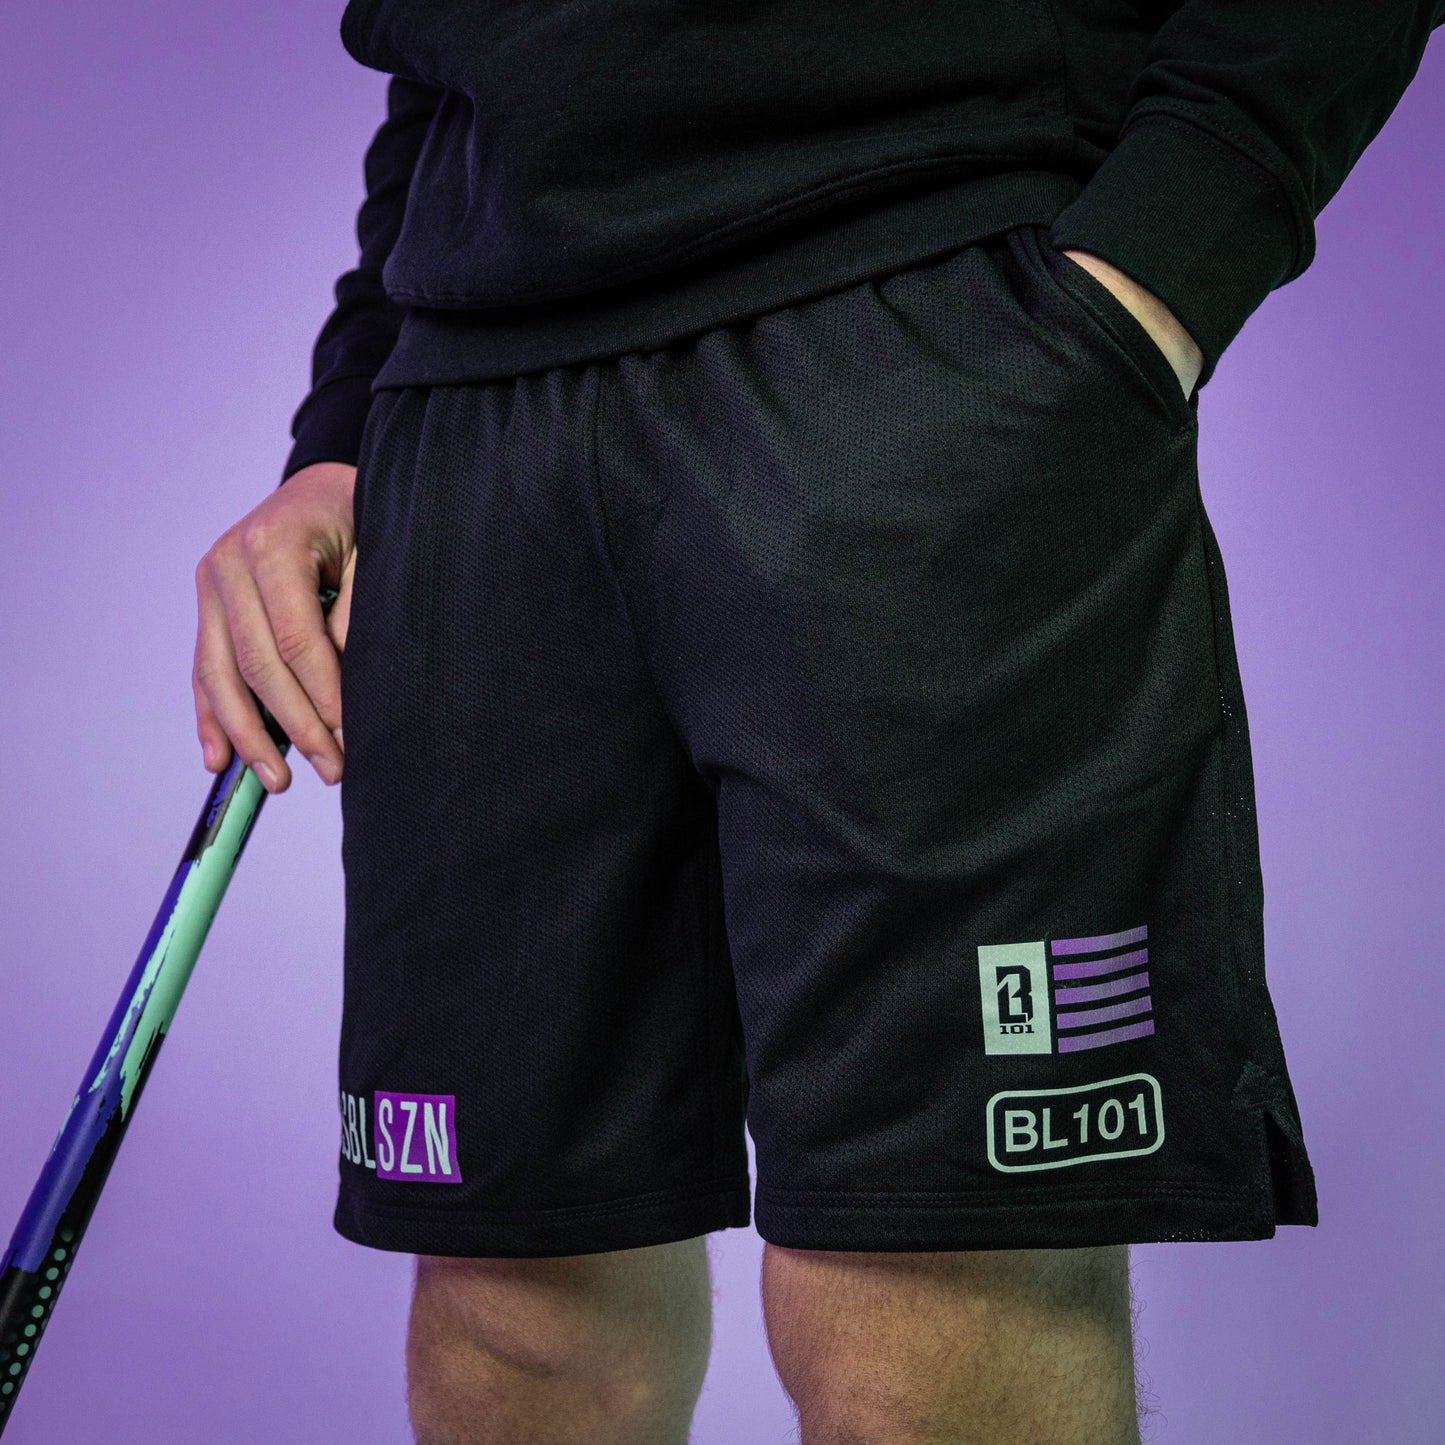 BSBL-SZN Youth Shorts - Infinity